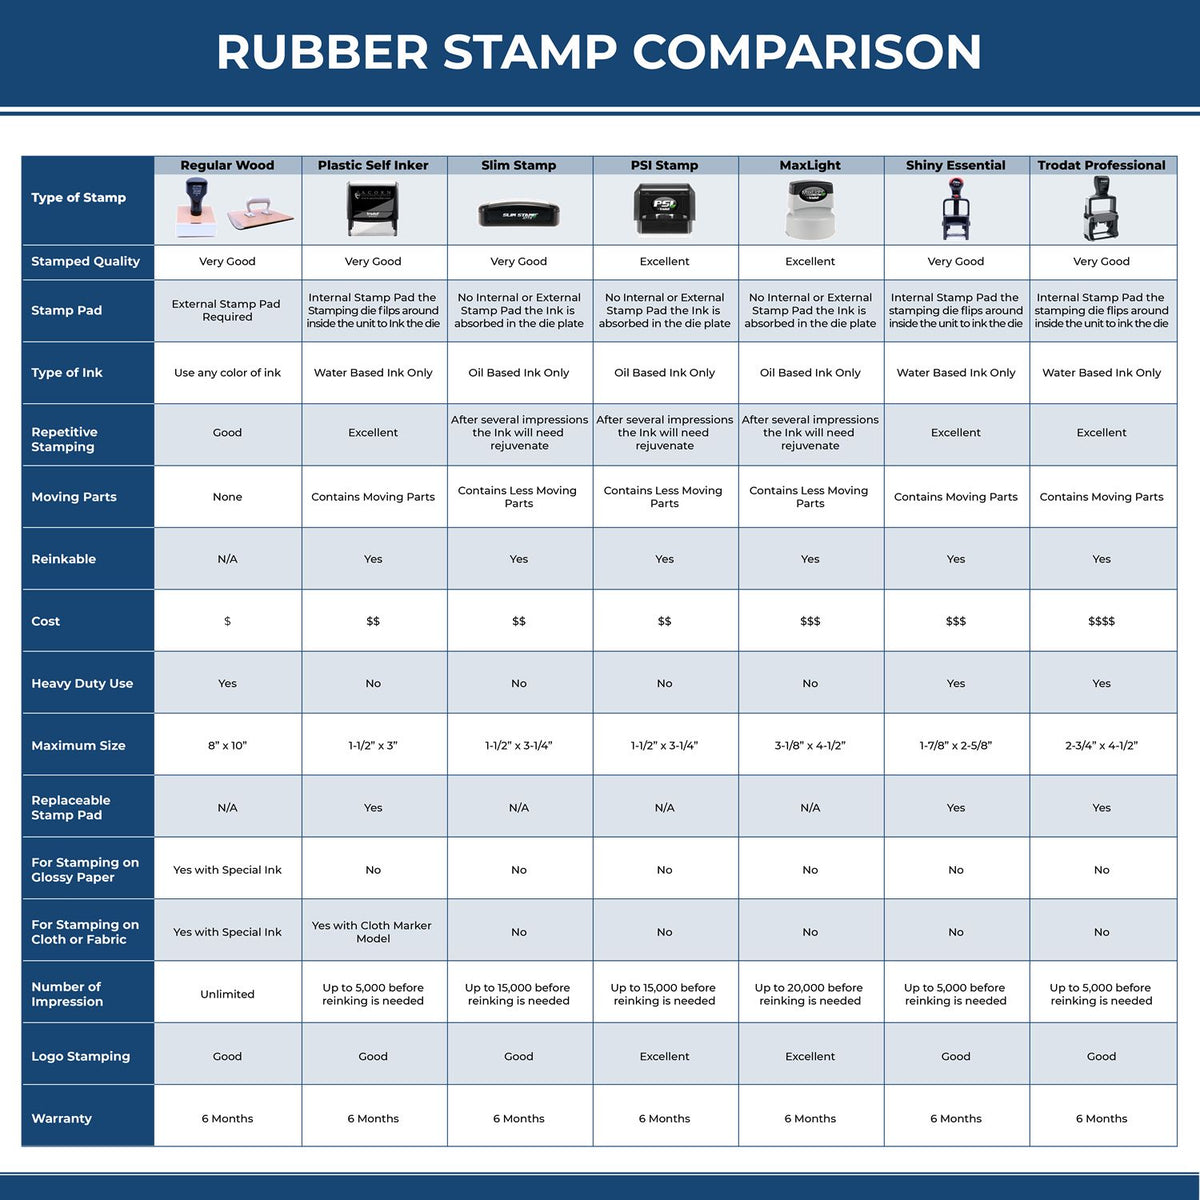 A comparison chart for the different types of mount models available for the Self-Inking New York Landscape Architect Stamp.